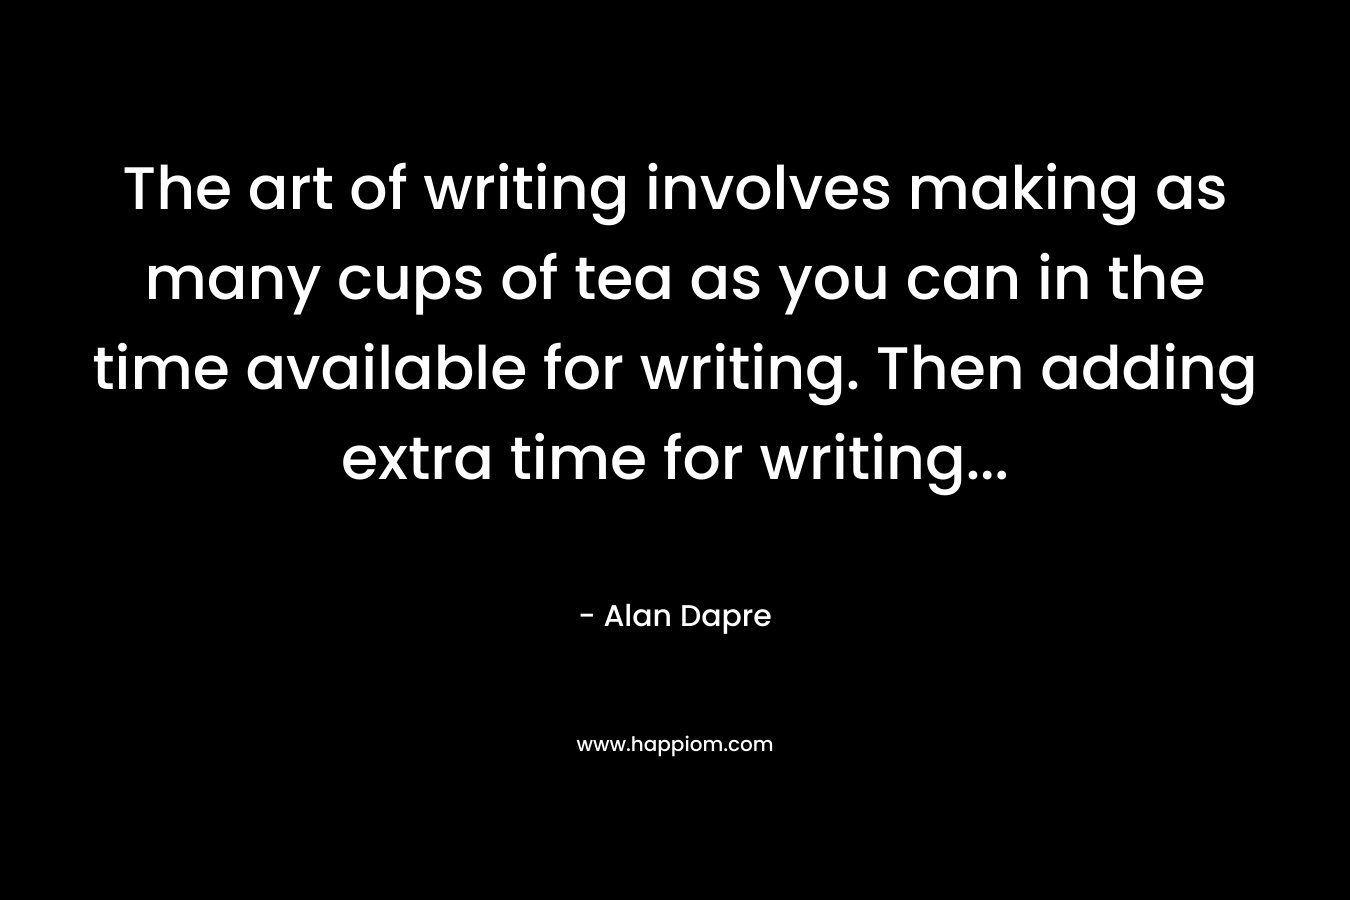 The art of writing involves making as many cups of tea as you can in the time available for writing. Then adding extra time for writing...